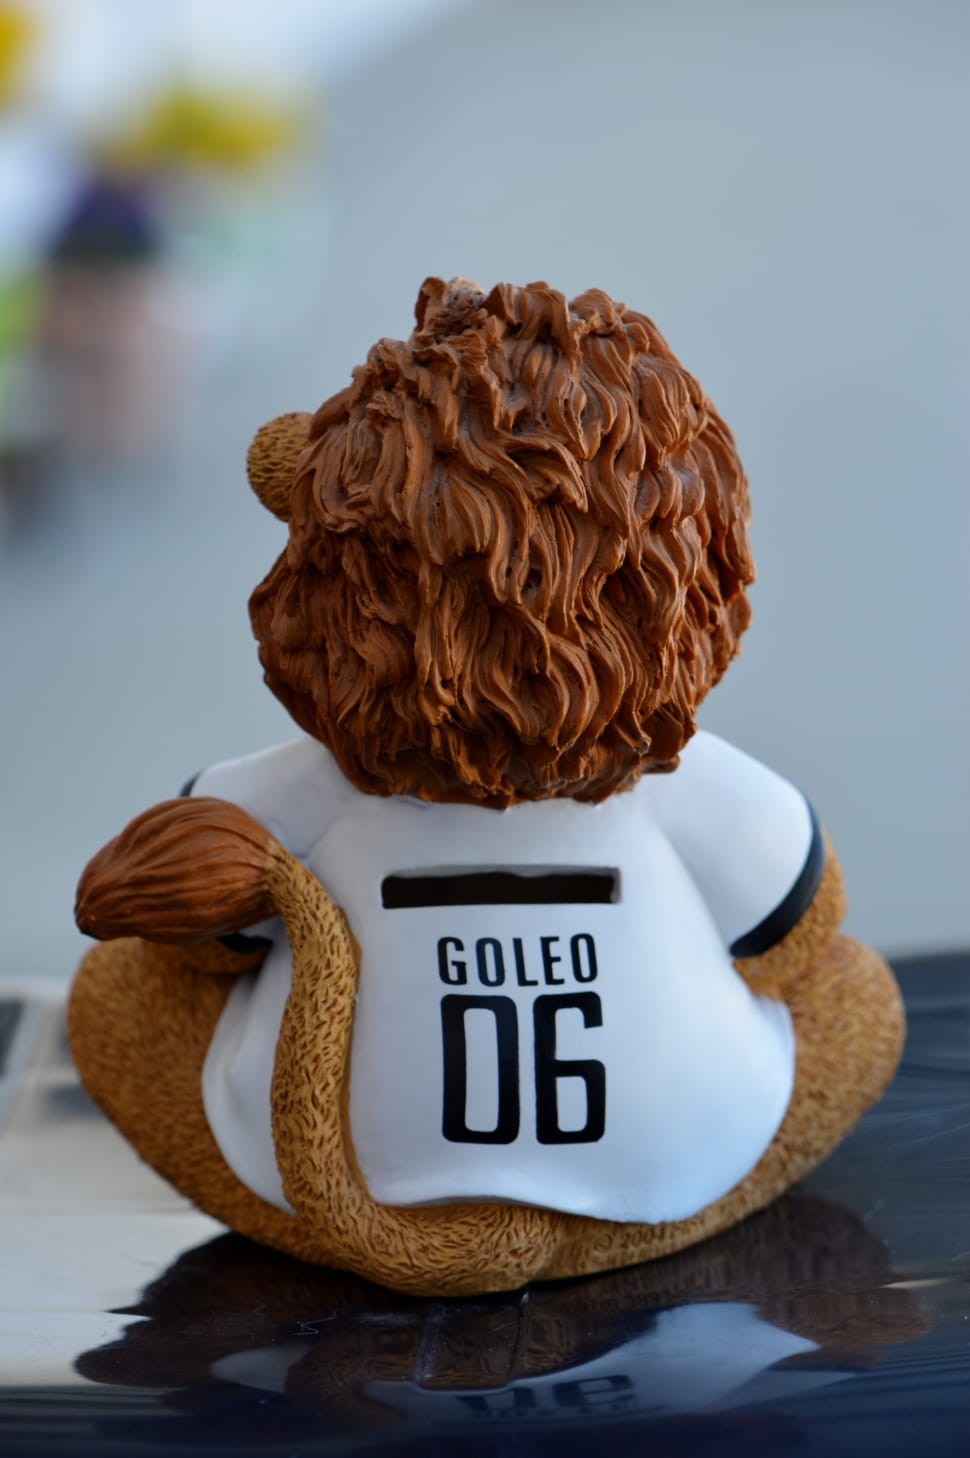 white and black lion goleo 06 jersey shirt figurine preview